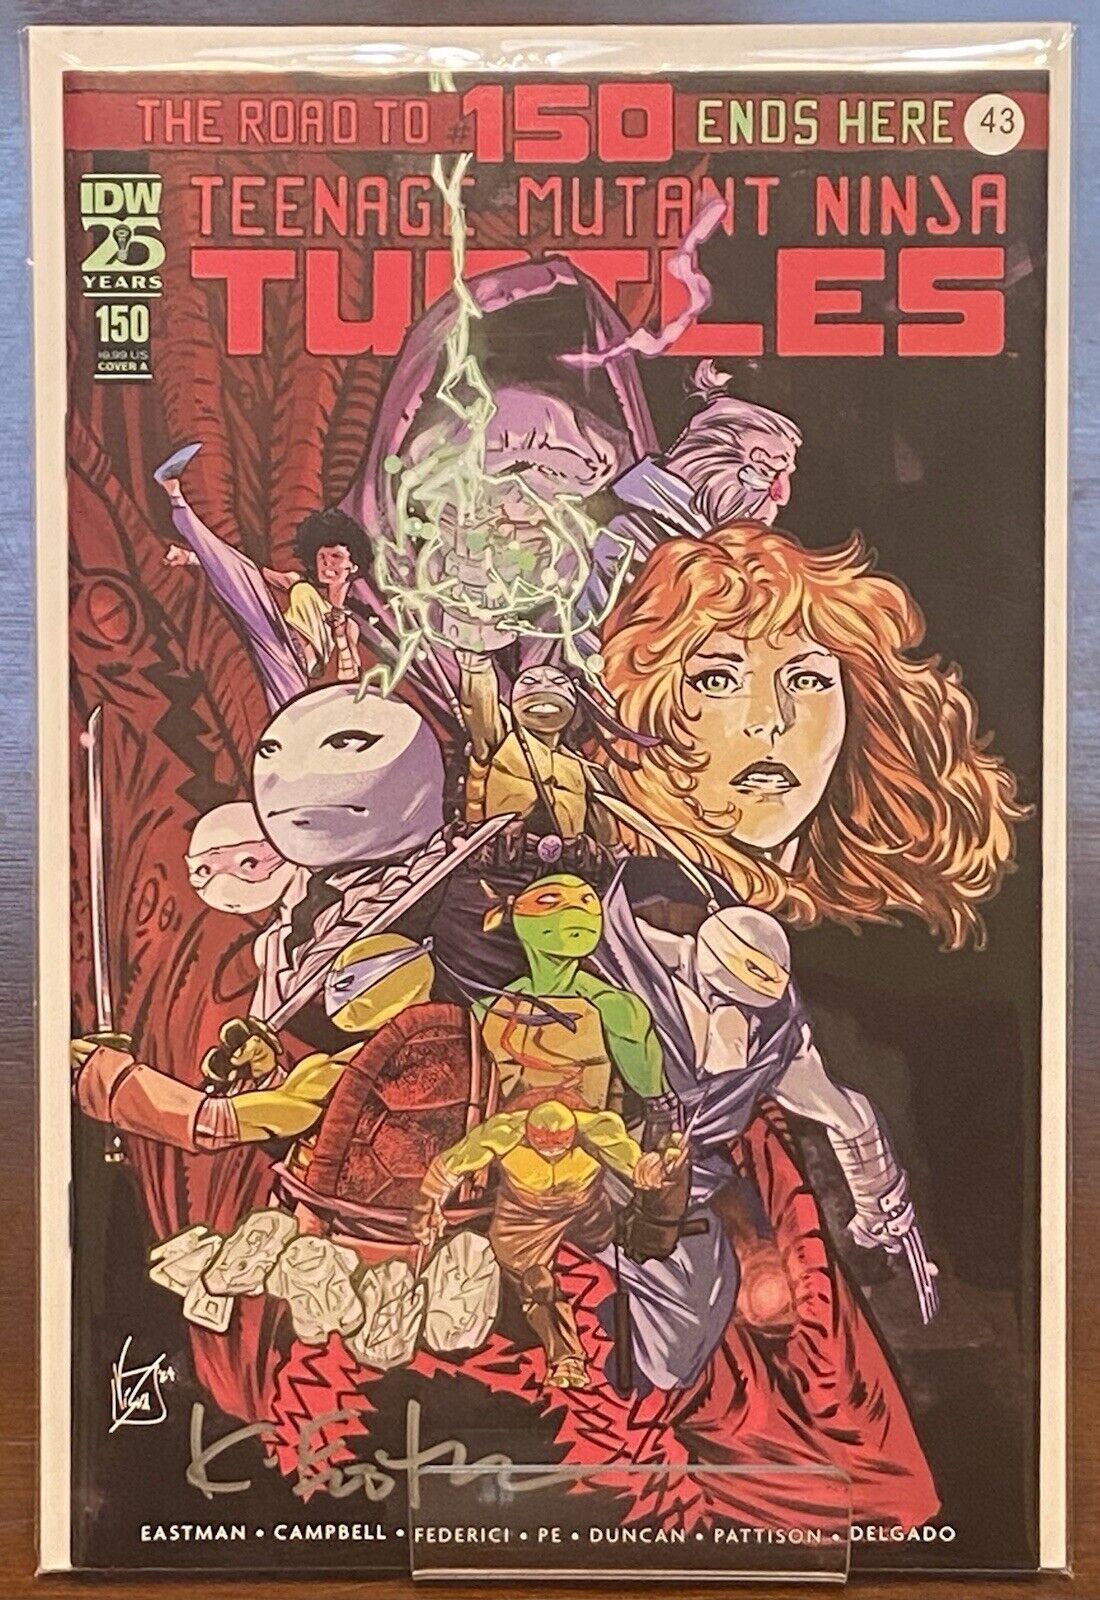 Teenage Mutant Ninja Turtles #150 Cover A SIGNED by Kevin Eastman with COA